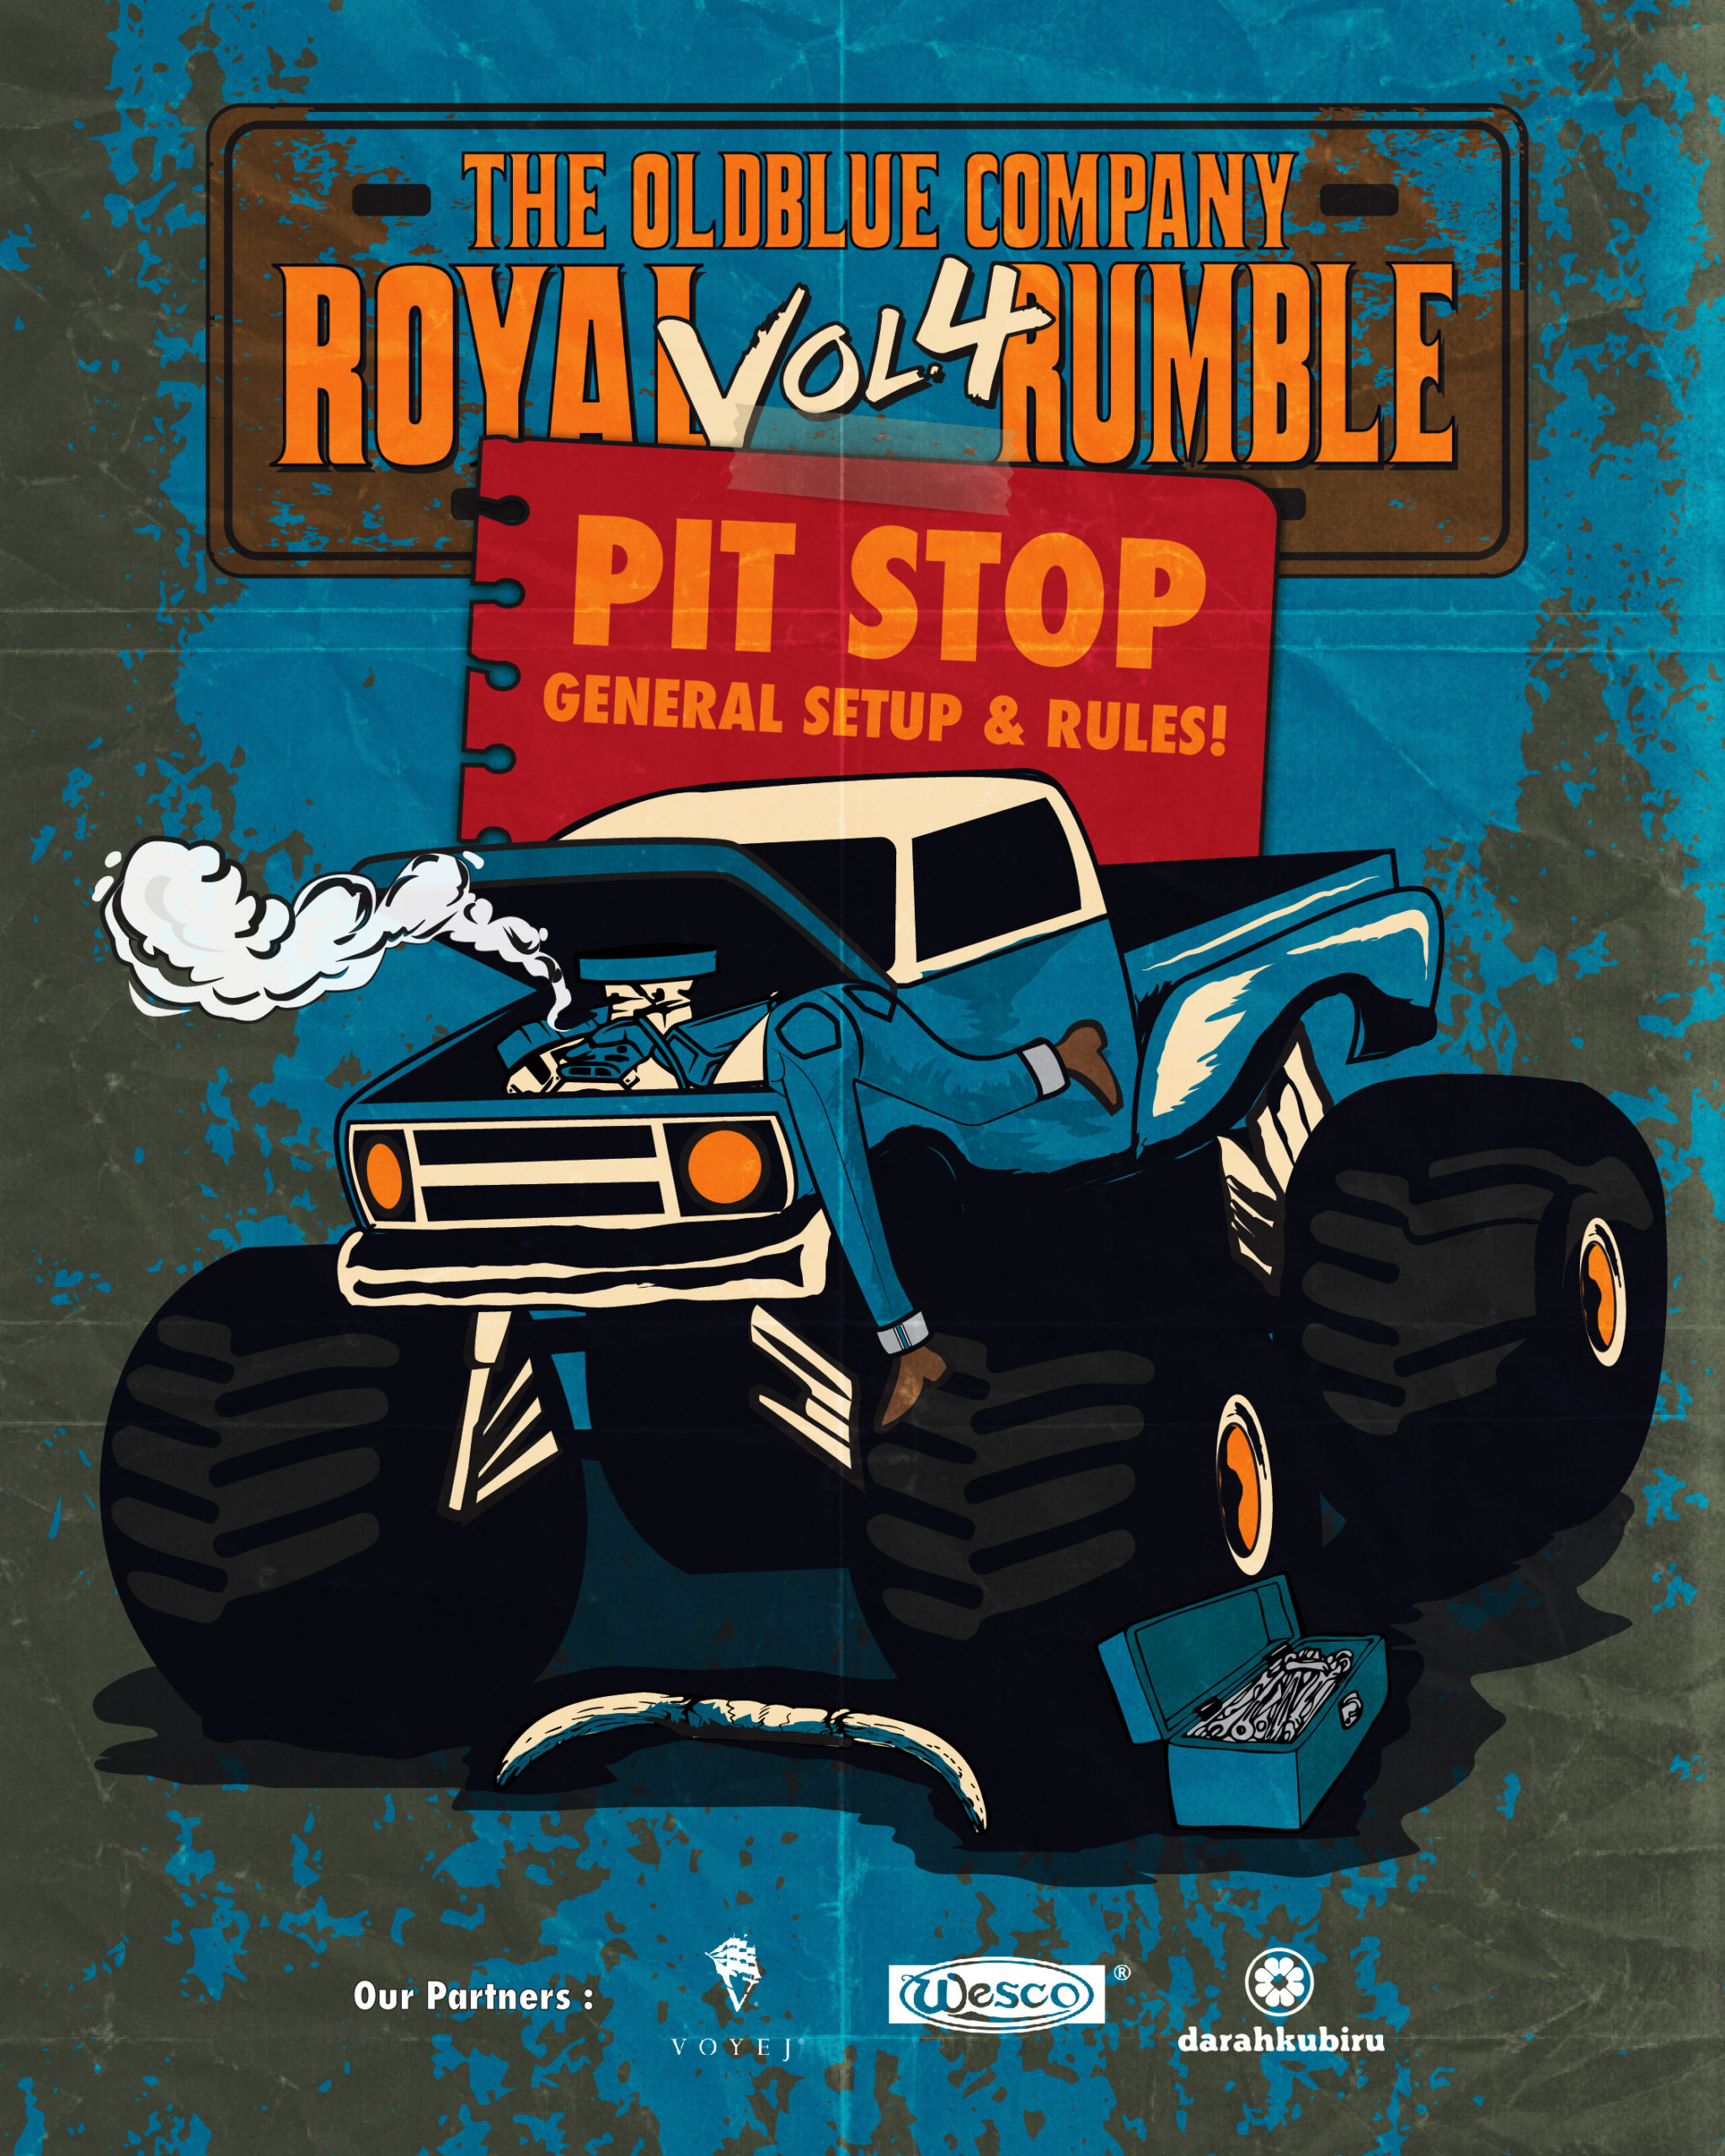 THE OLDBLUE ROYAL RUMBLE PIT STOP! GENERAL SETUP & RULES!